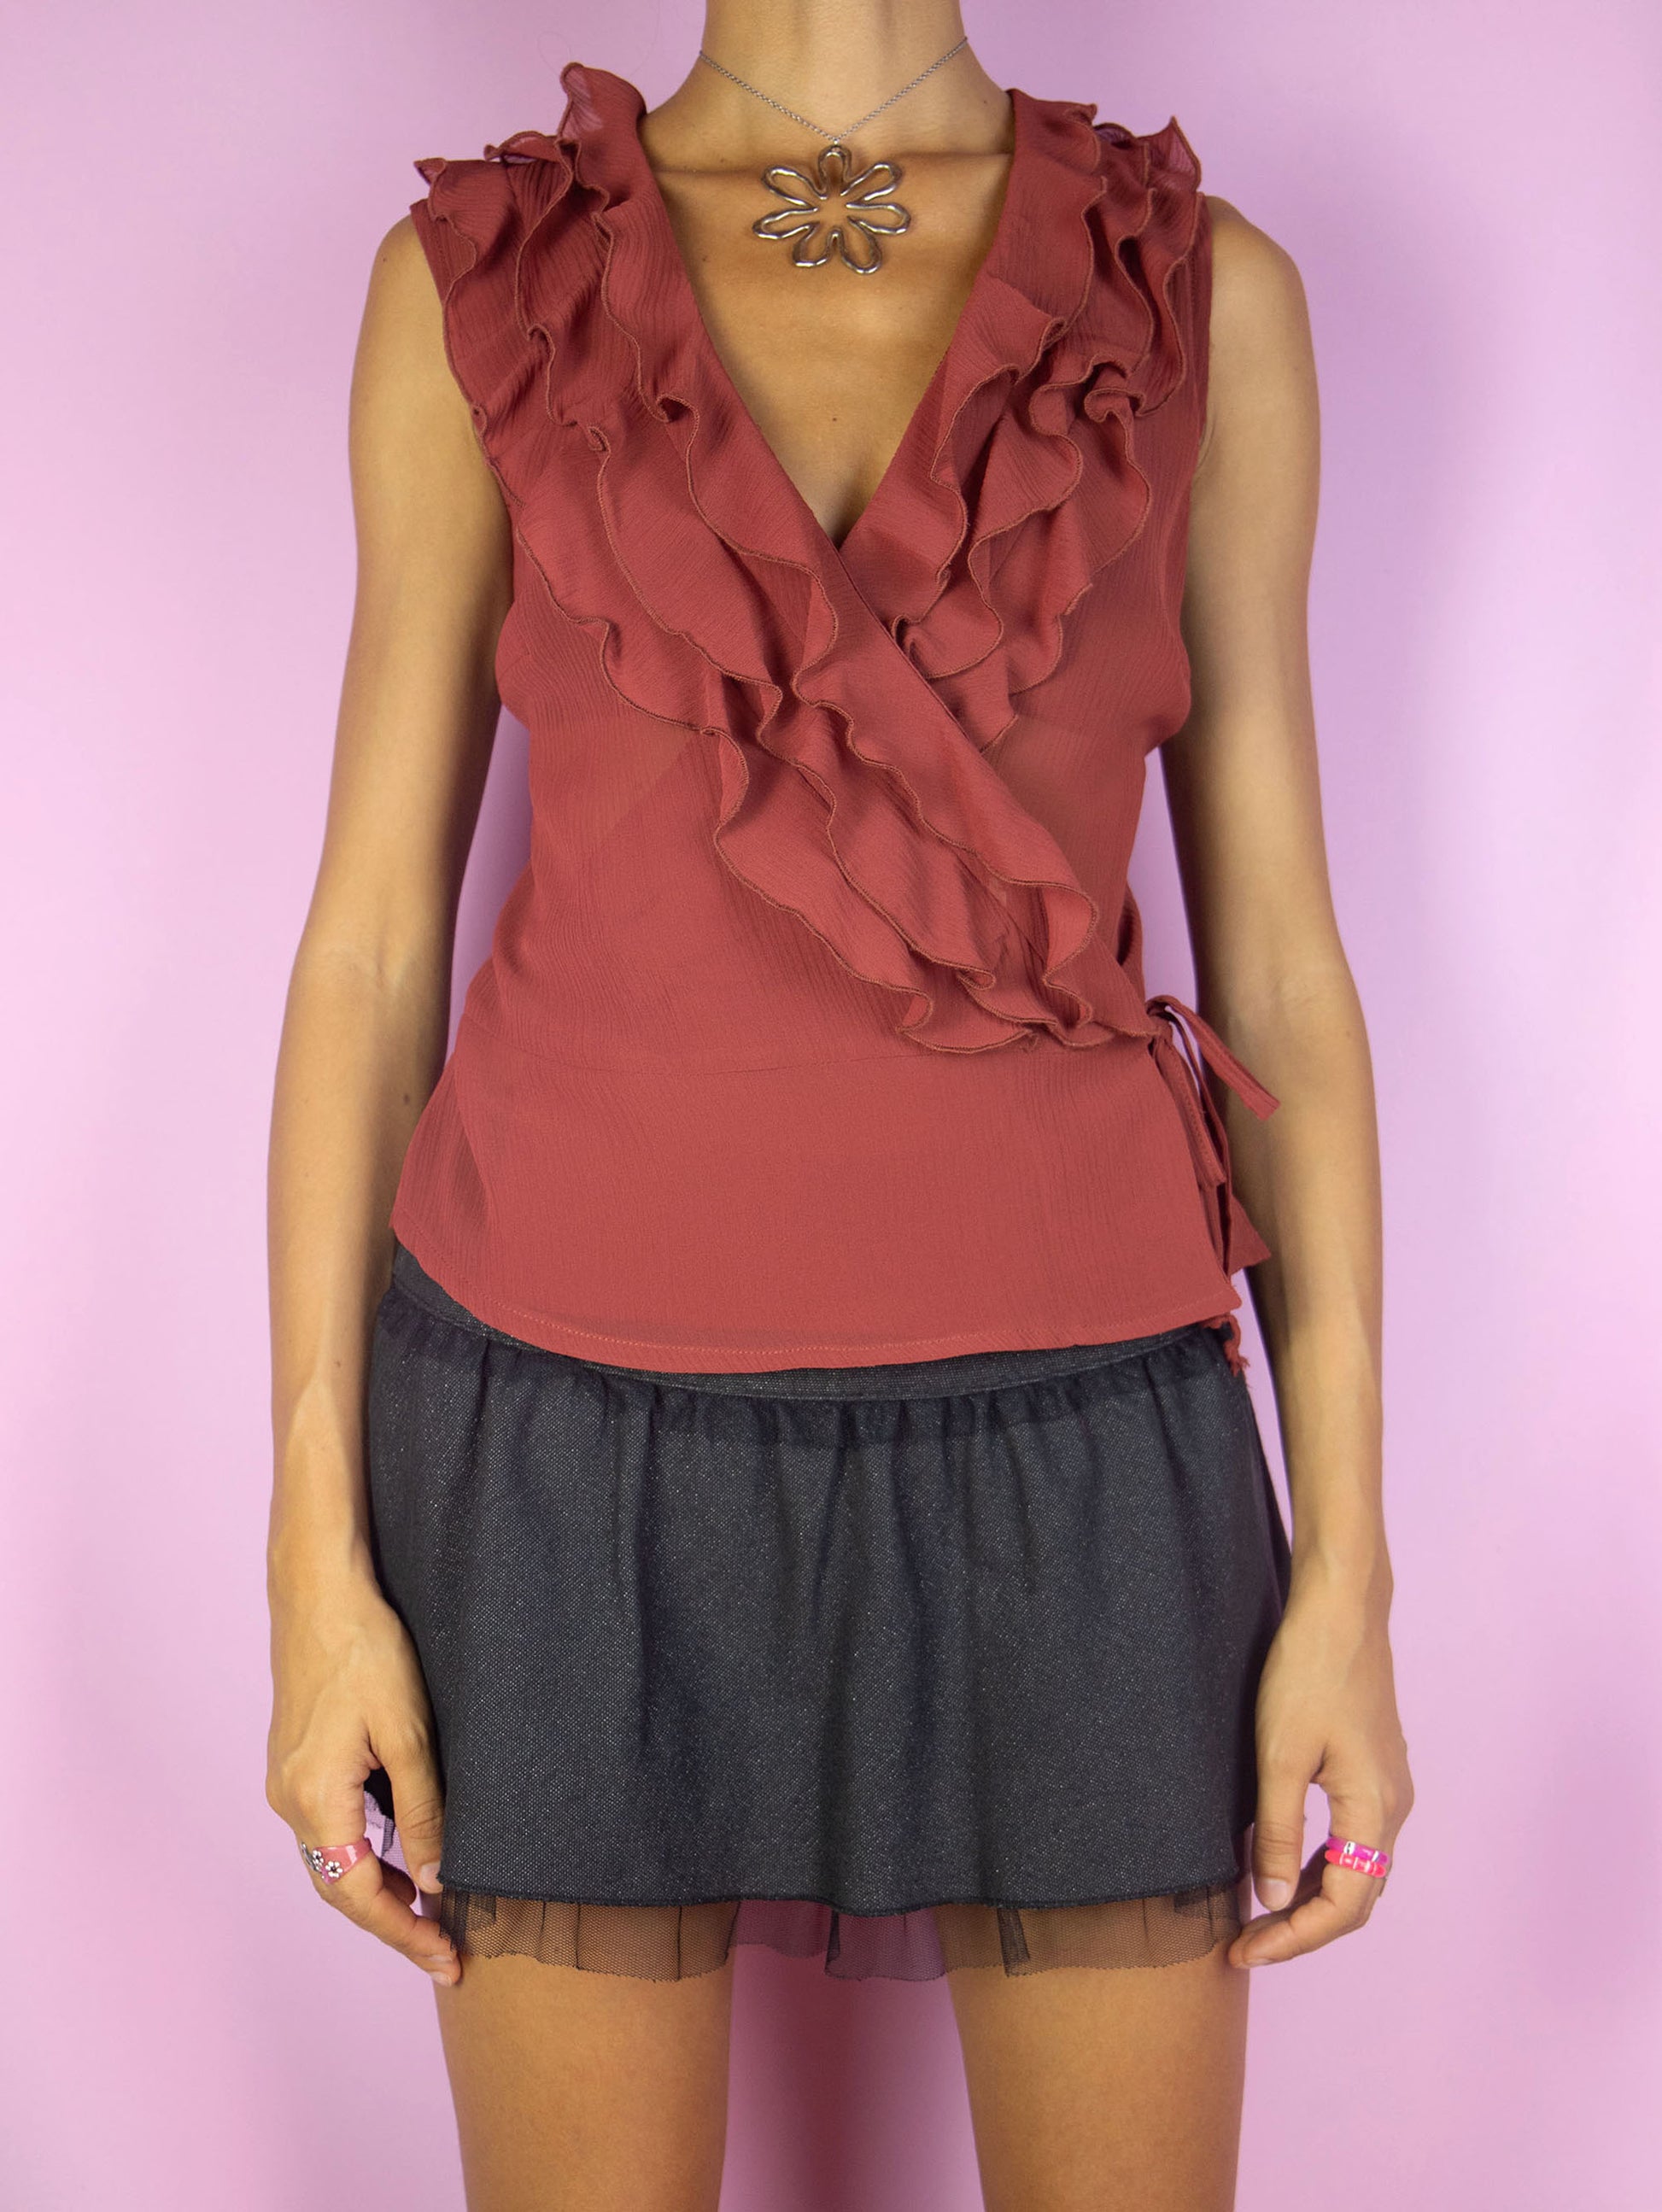 The Vintage 90's Maroon Ruffle Wrap Top is a semi-sheer terracotta maroon sleeveless side tied wrap top with a ruffle collar. Lovely avant garde romantic fairy grunge summer blouse circa 1990's.